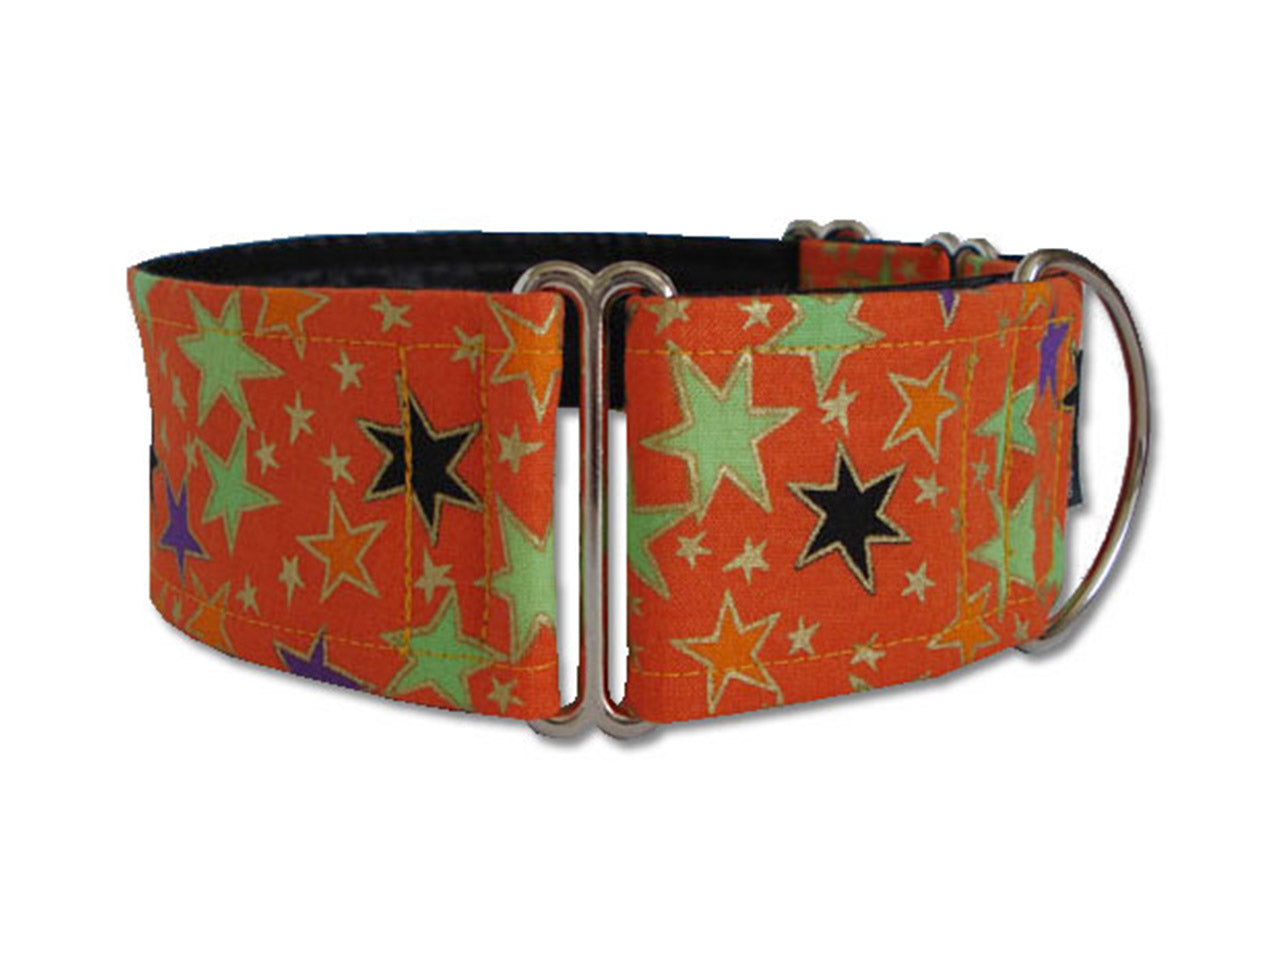 Orange, black, purple, and green stars sparkle on bright orange for a big Halloween statement! And fun anytime your pooch wants to shine!